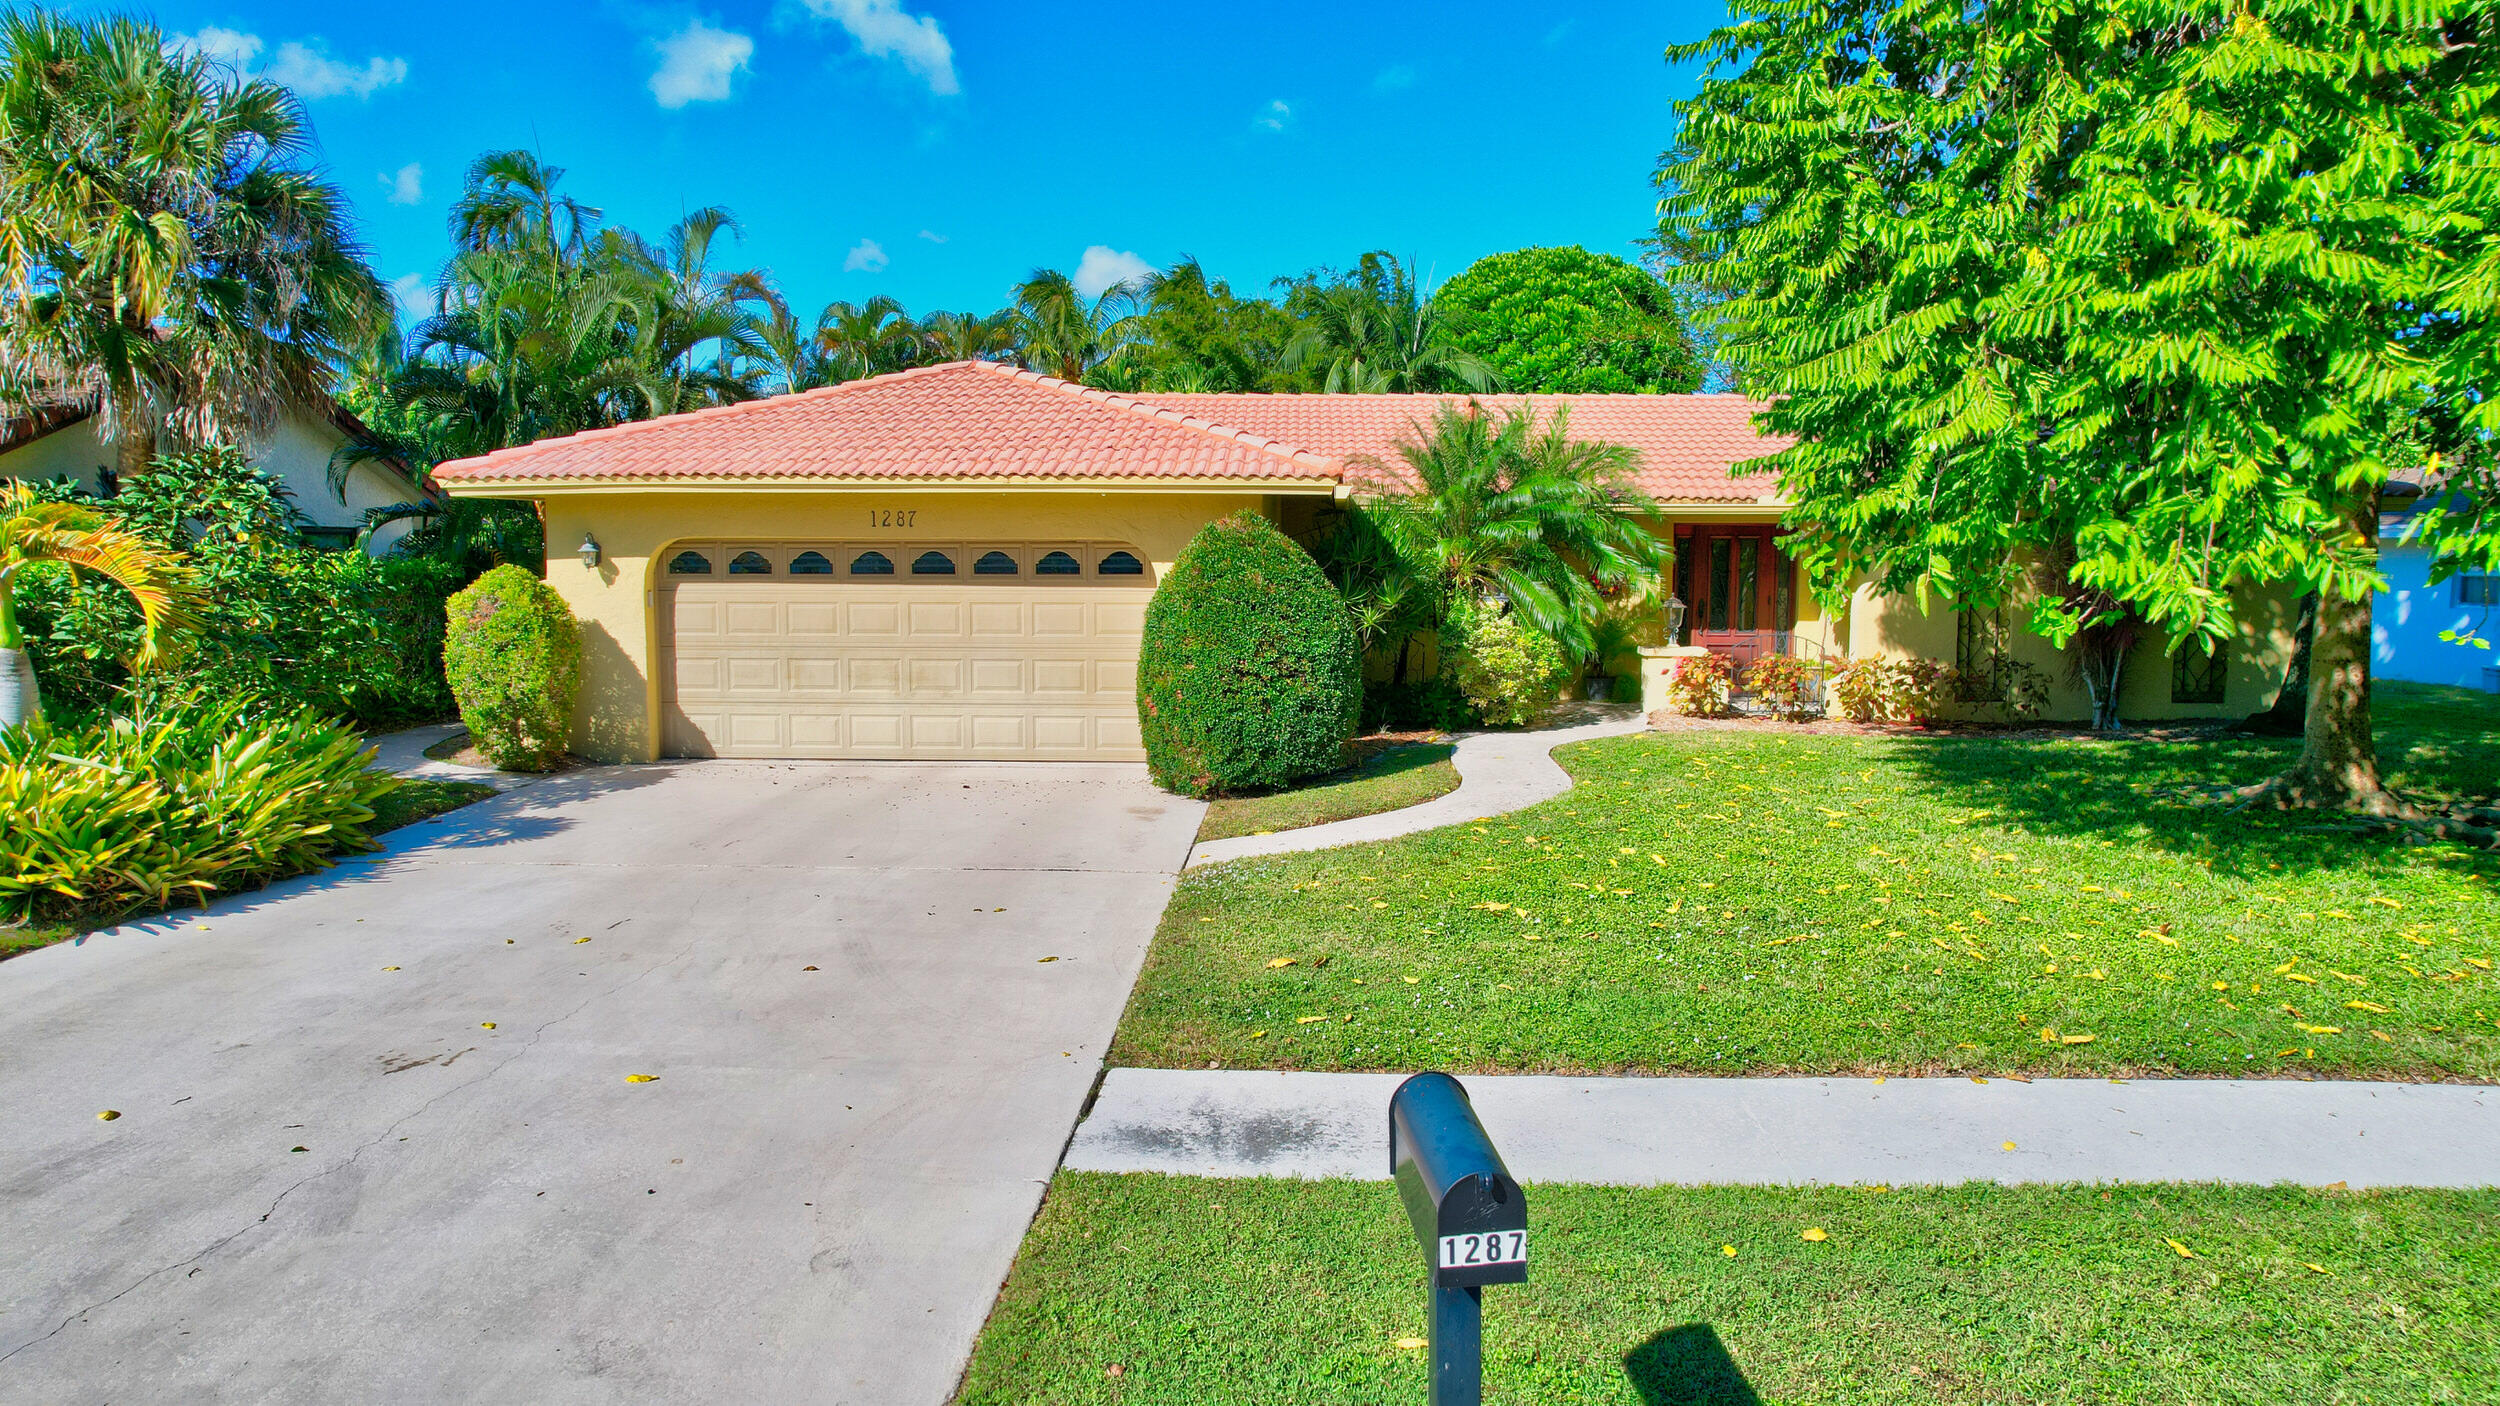 Property for Sale at 1287 Sw 21st Street, Boca Raton, Palm Beach County, Florida - Bedrooms: 3 
Bathrooms: 2  - $1,089,000